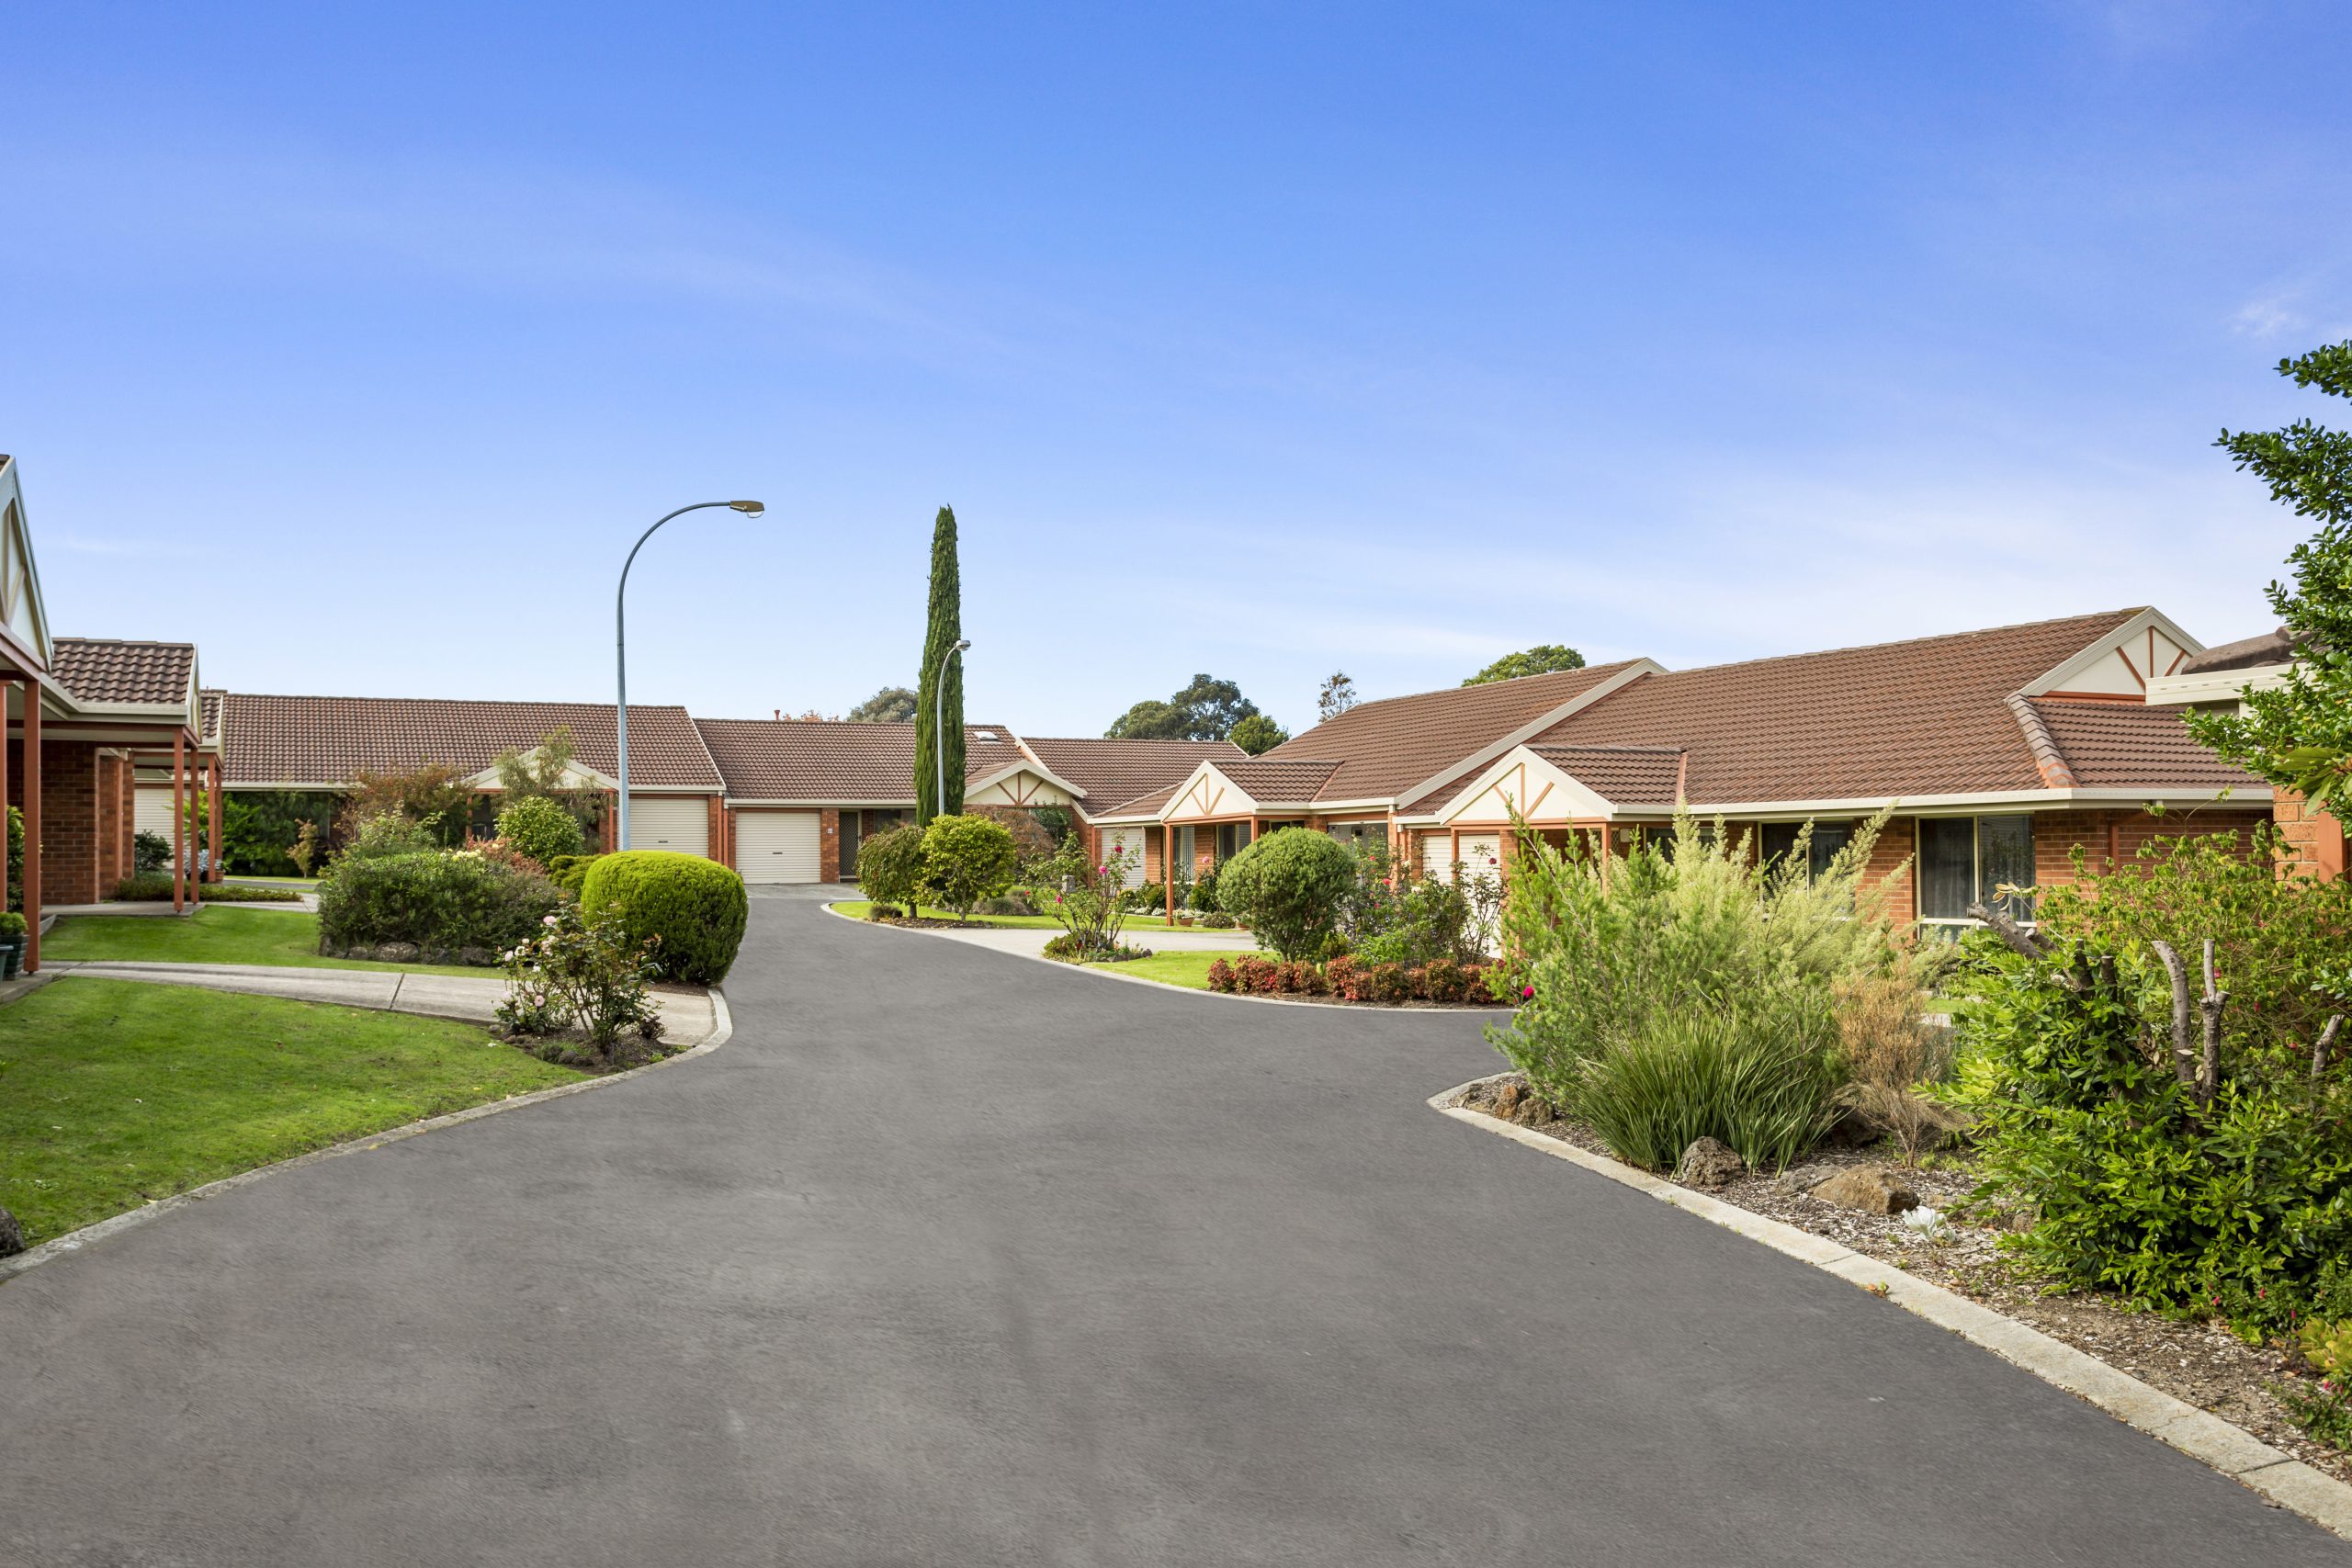 Barrina Gardens Retirement Village: Independent Living Units and Lifestyle Community